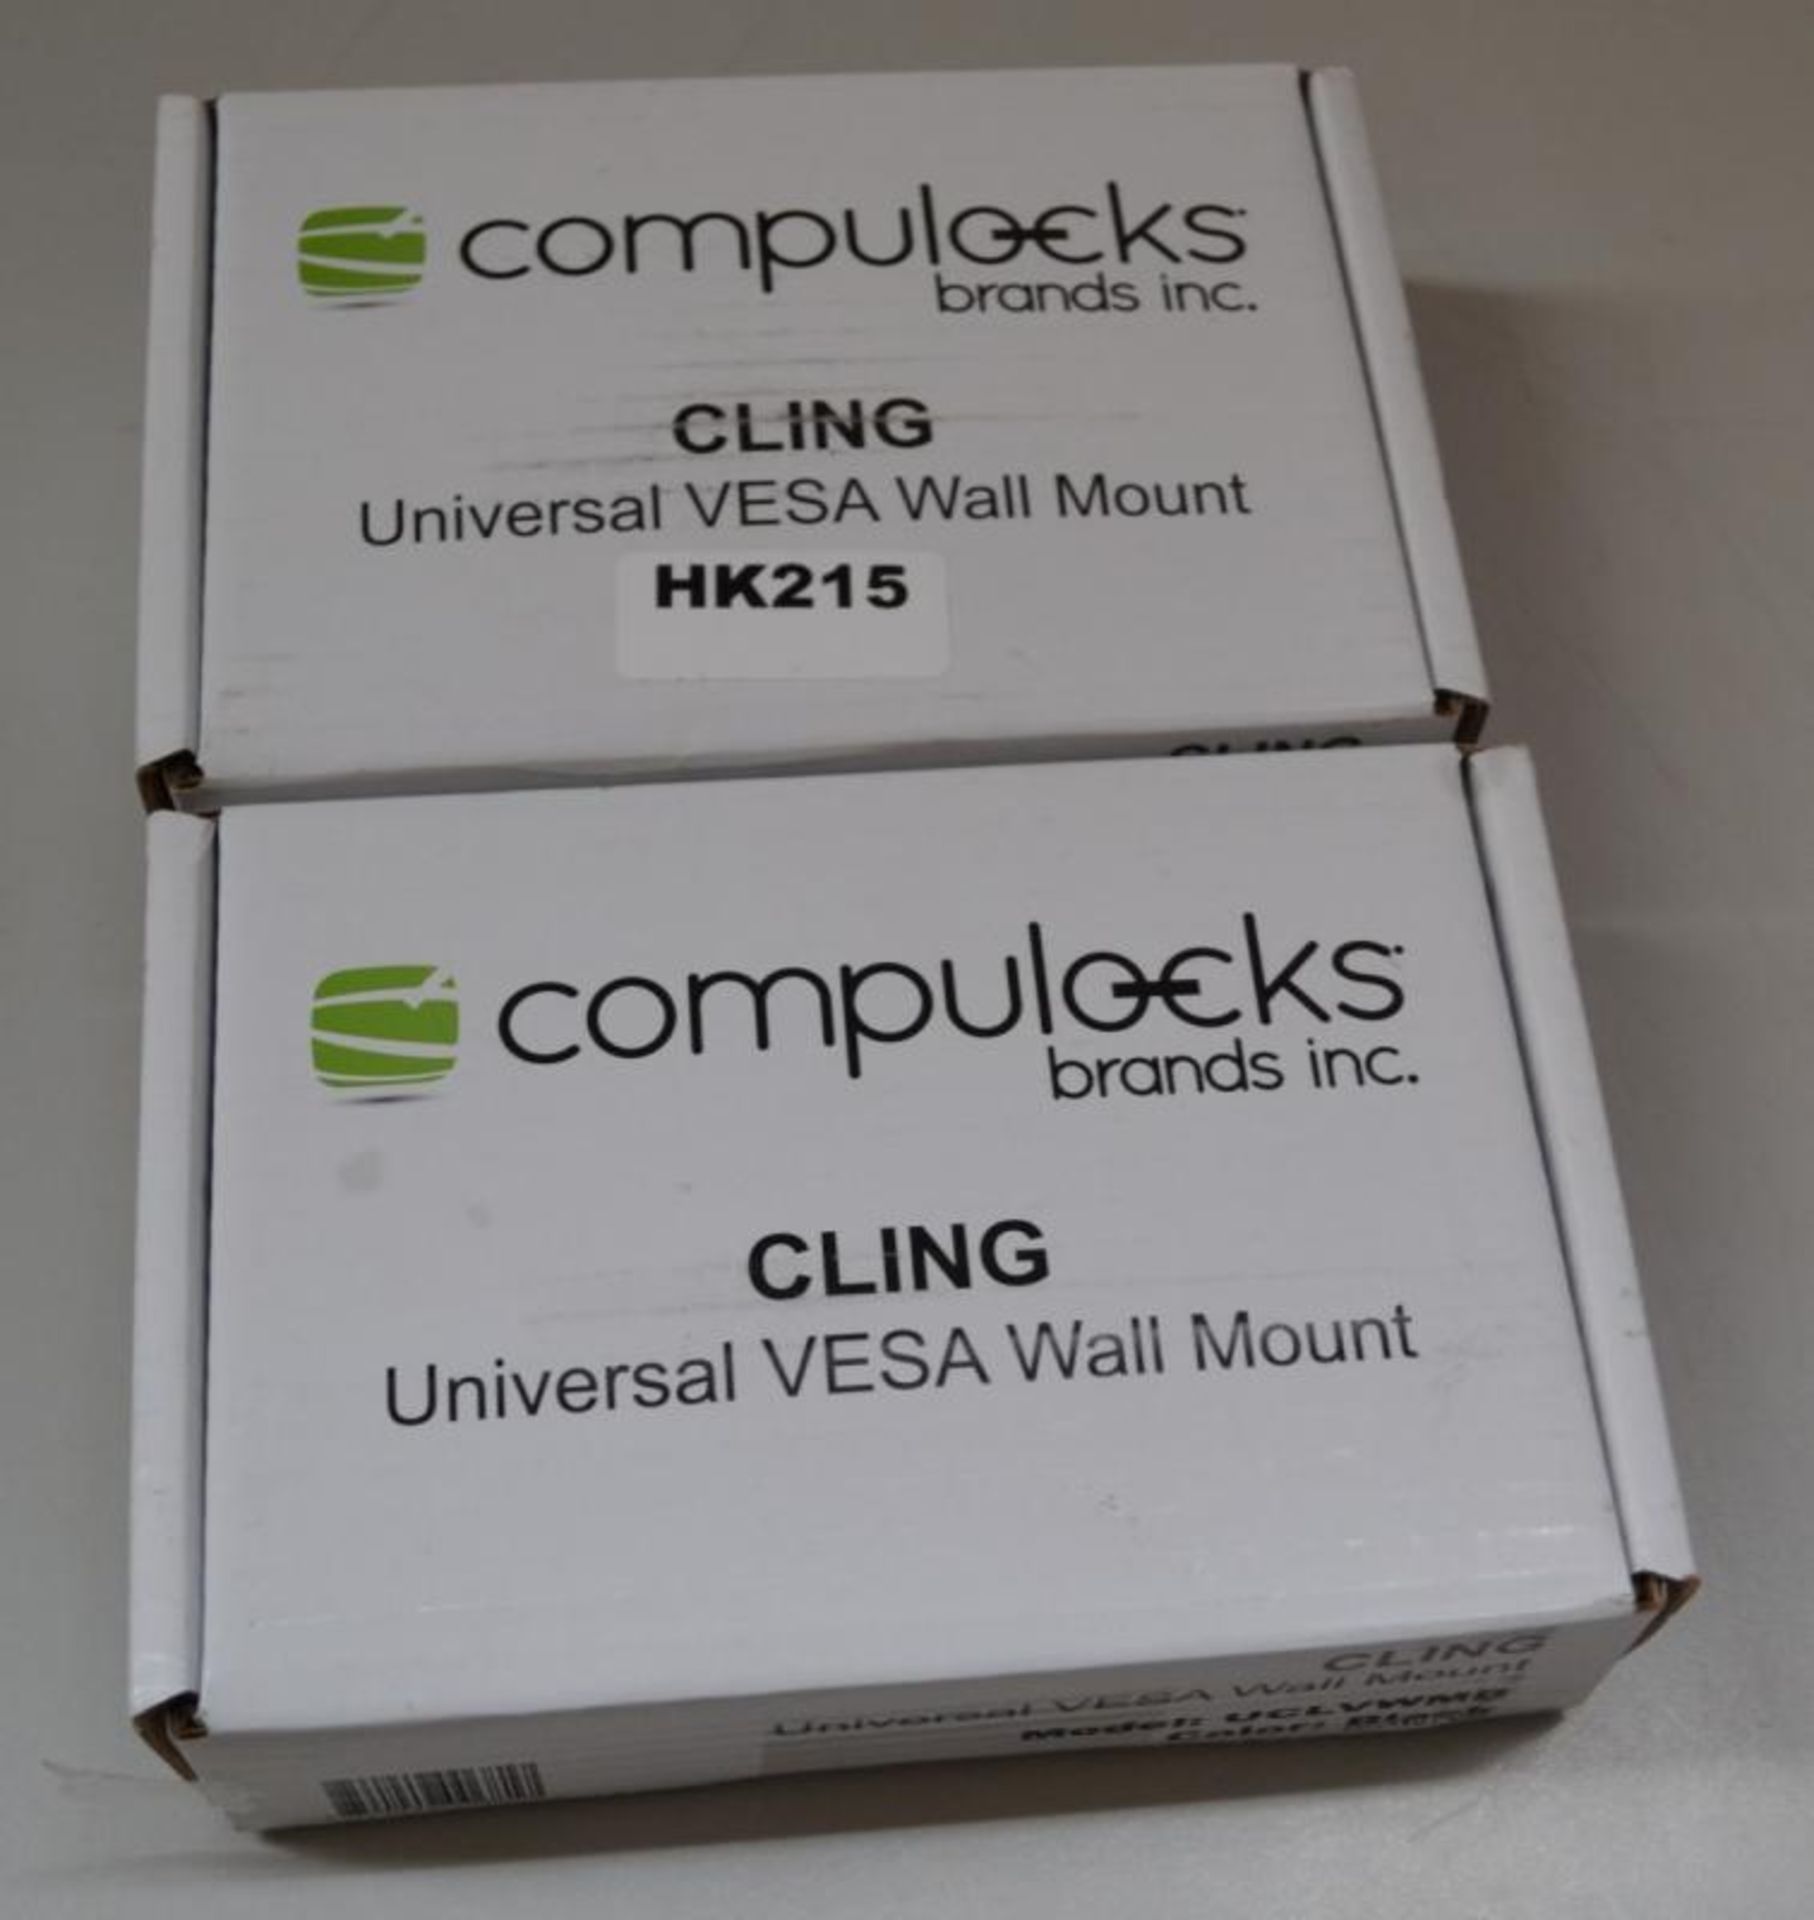 2 x Maclocks UCLGVWMB Cling Universal Security Wall Mount 13" Screen Support New In Box - Ref HK215 - Image 3 of 3